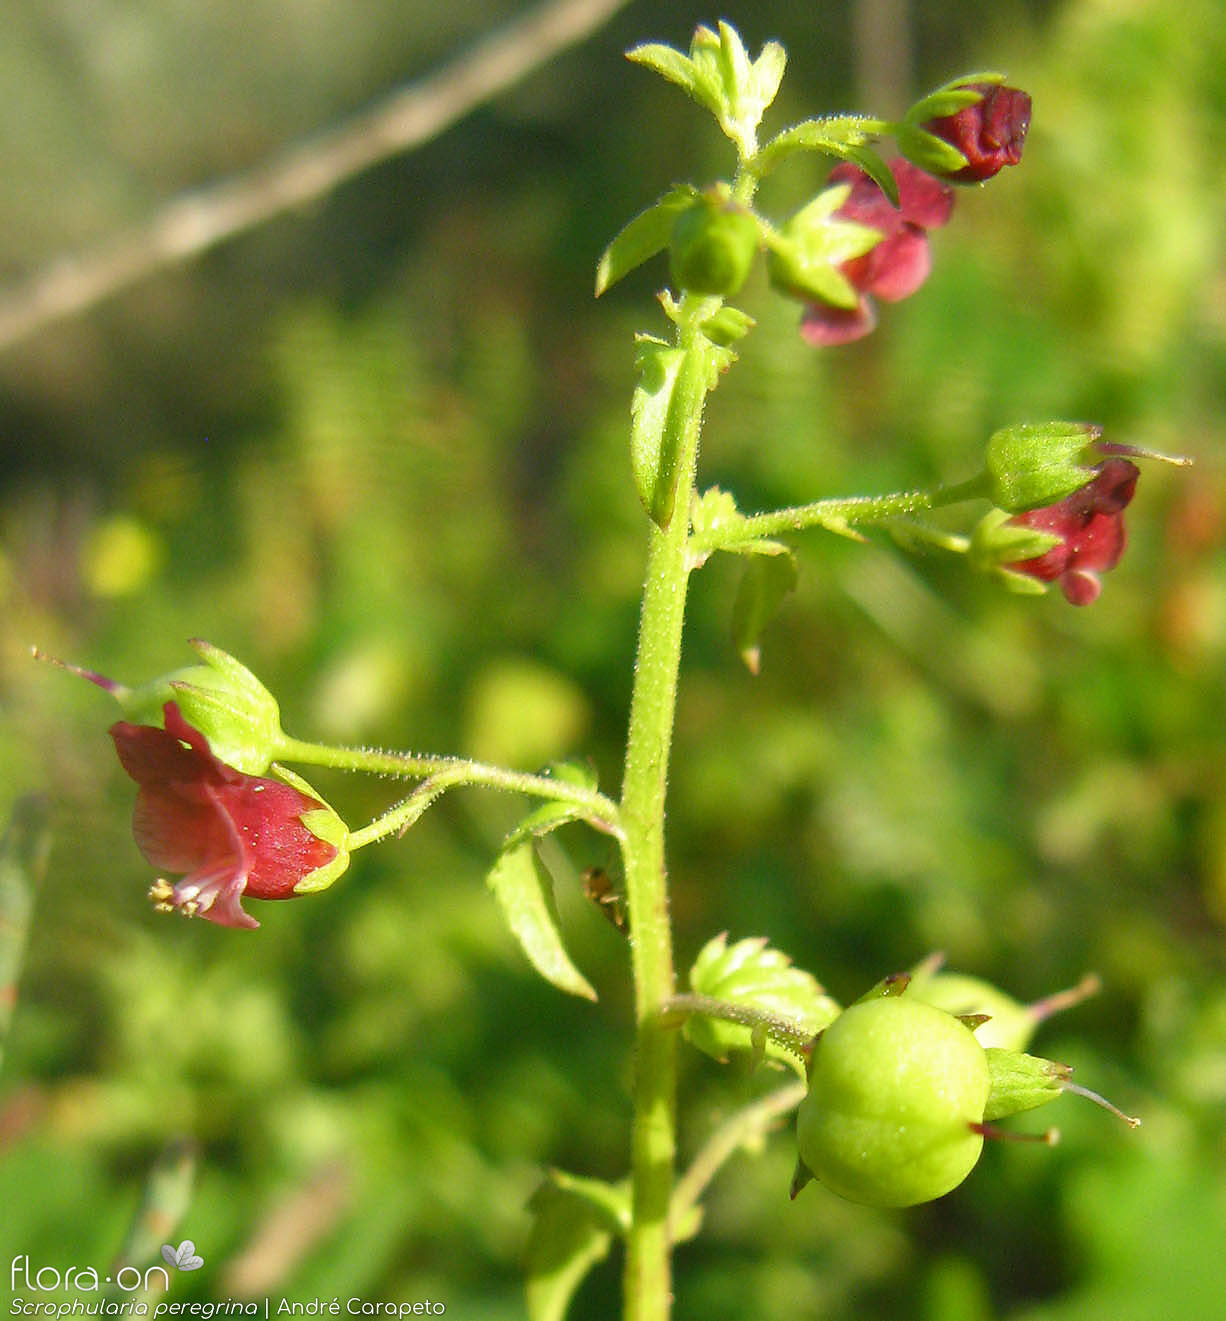 Scrophularia peregrina - Flor (geral) | André Carapeto; CC BY-NC 4.0